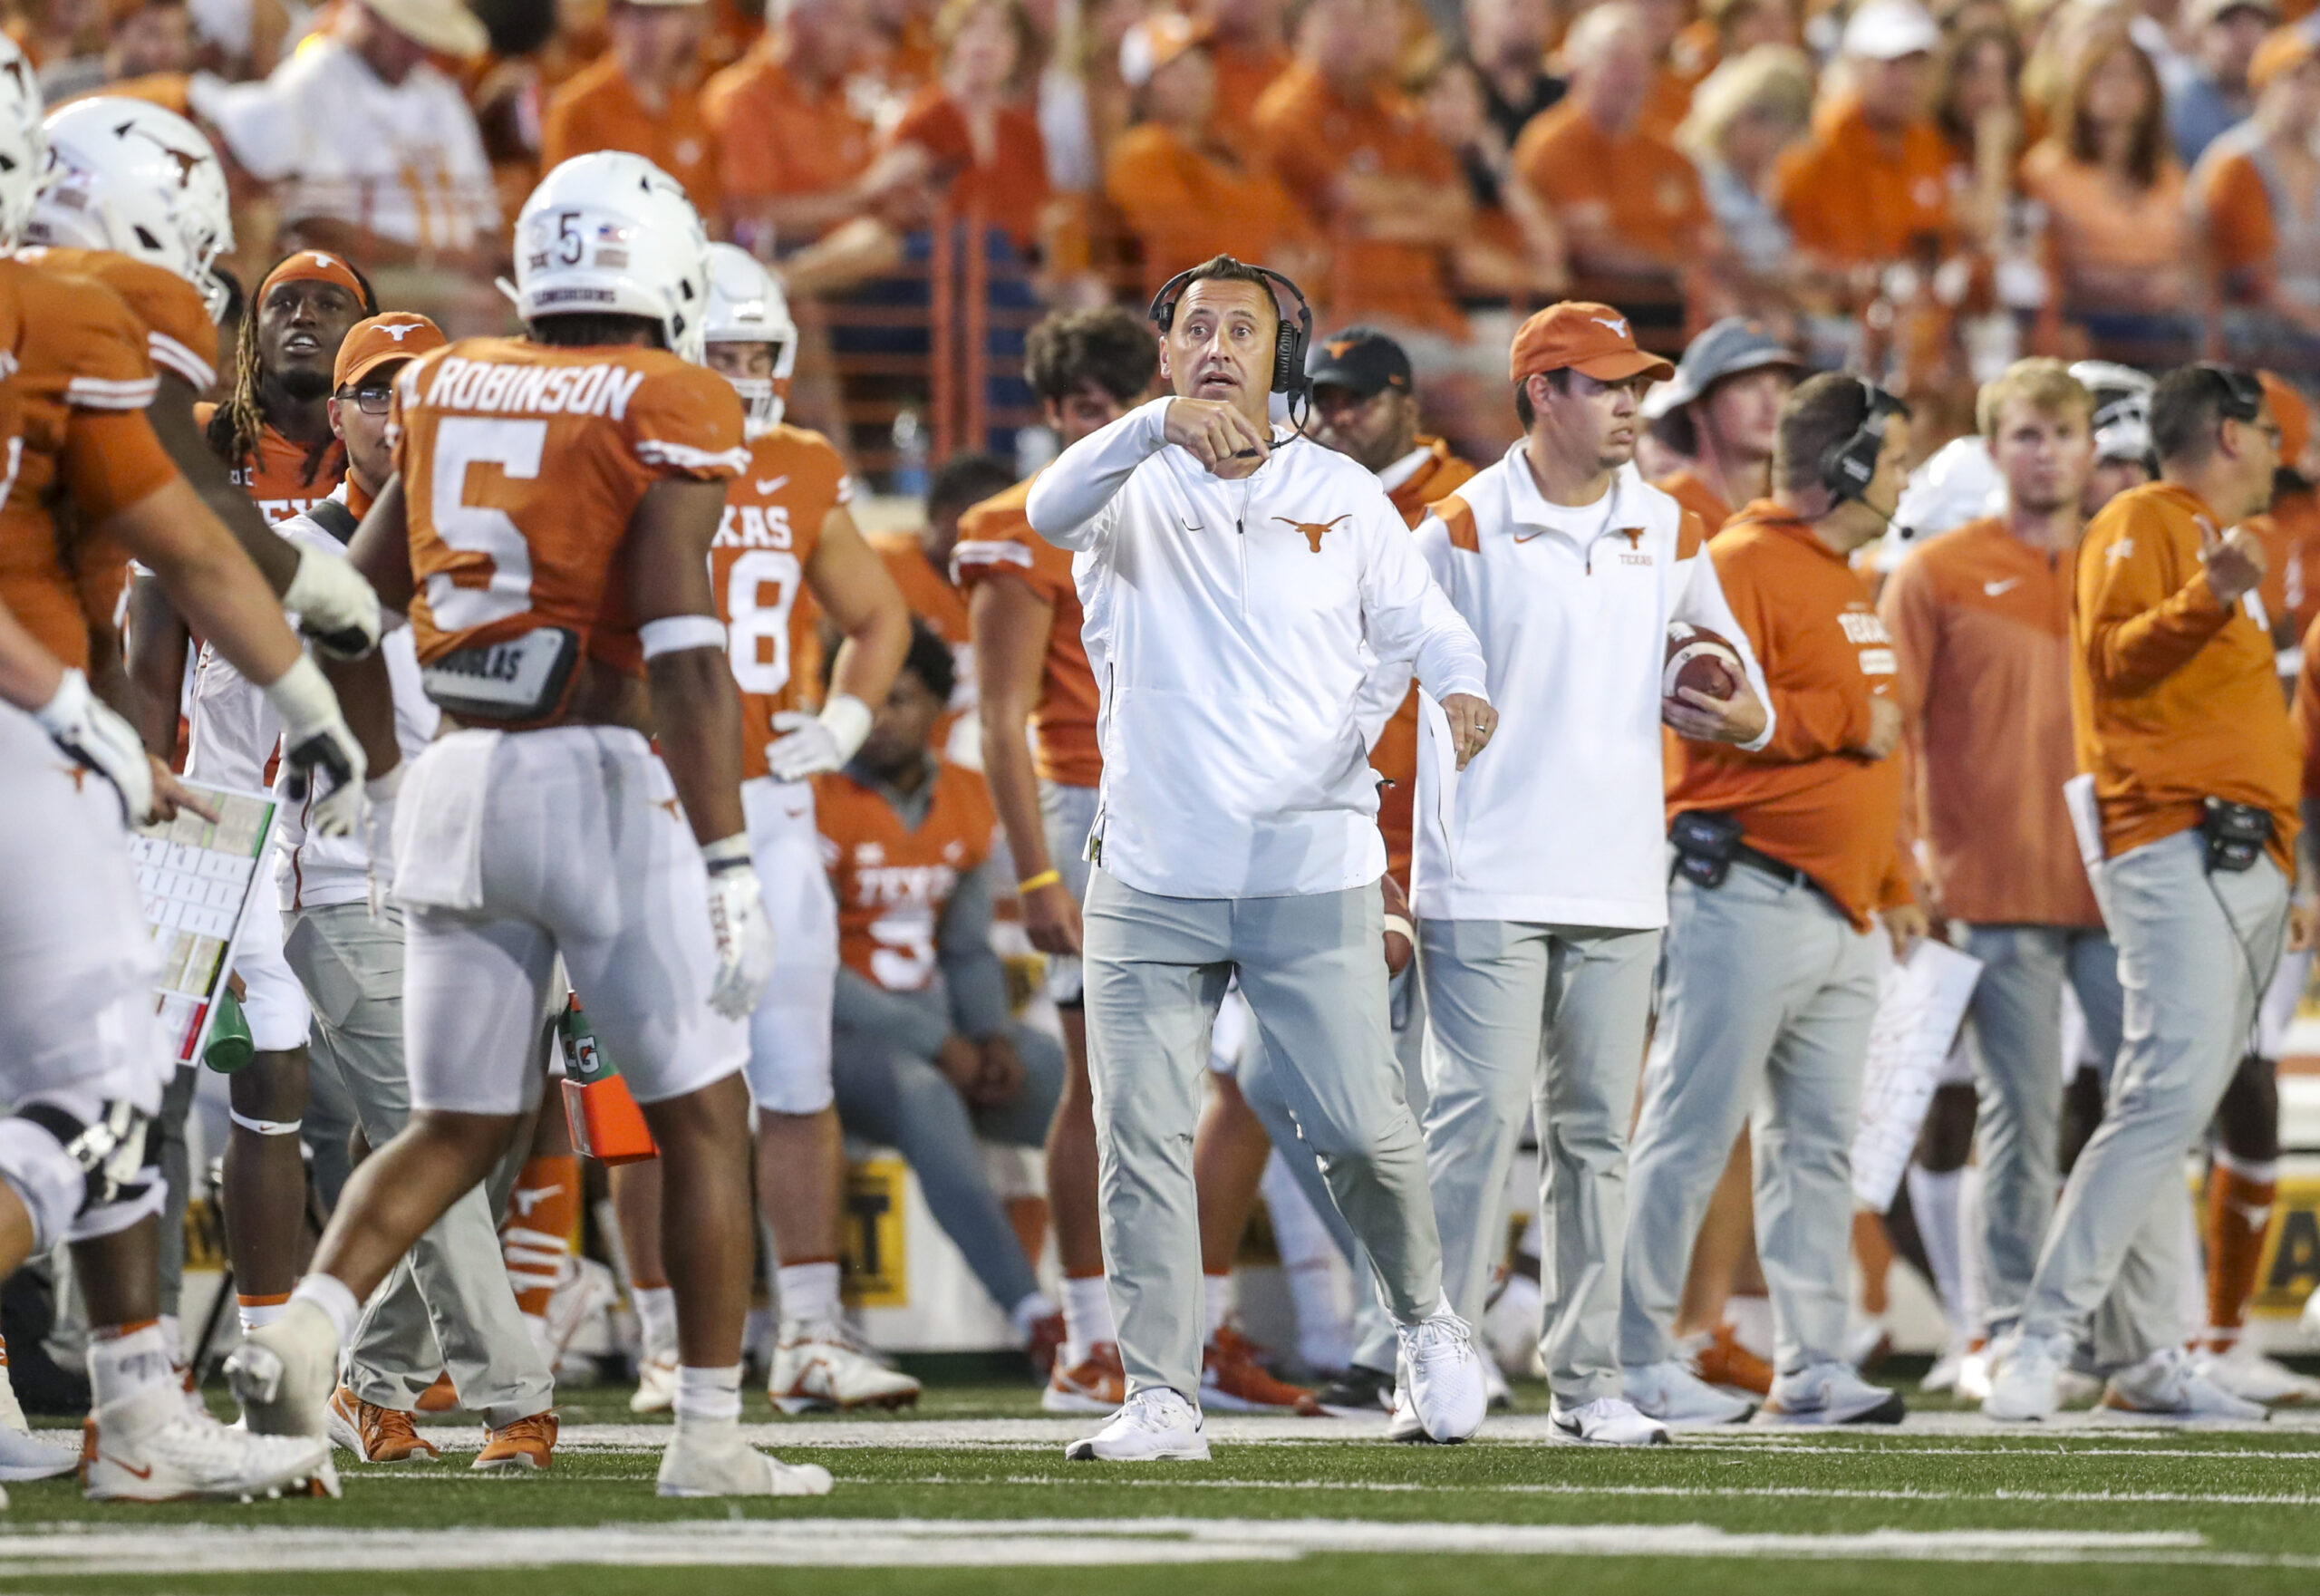 Texas is third in the big 12 power rankings